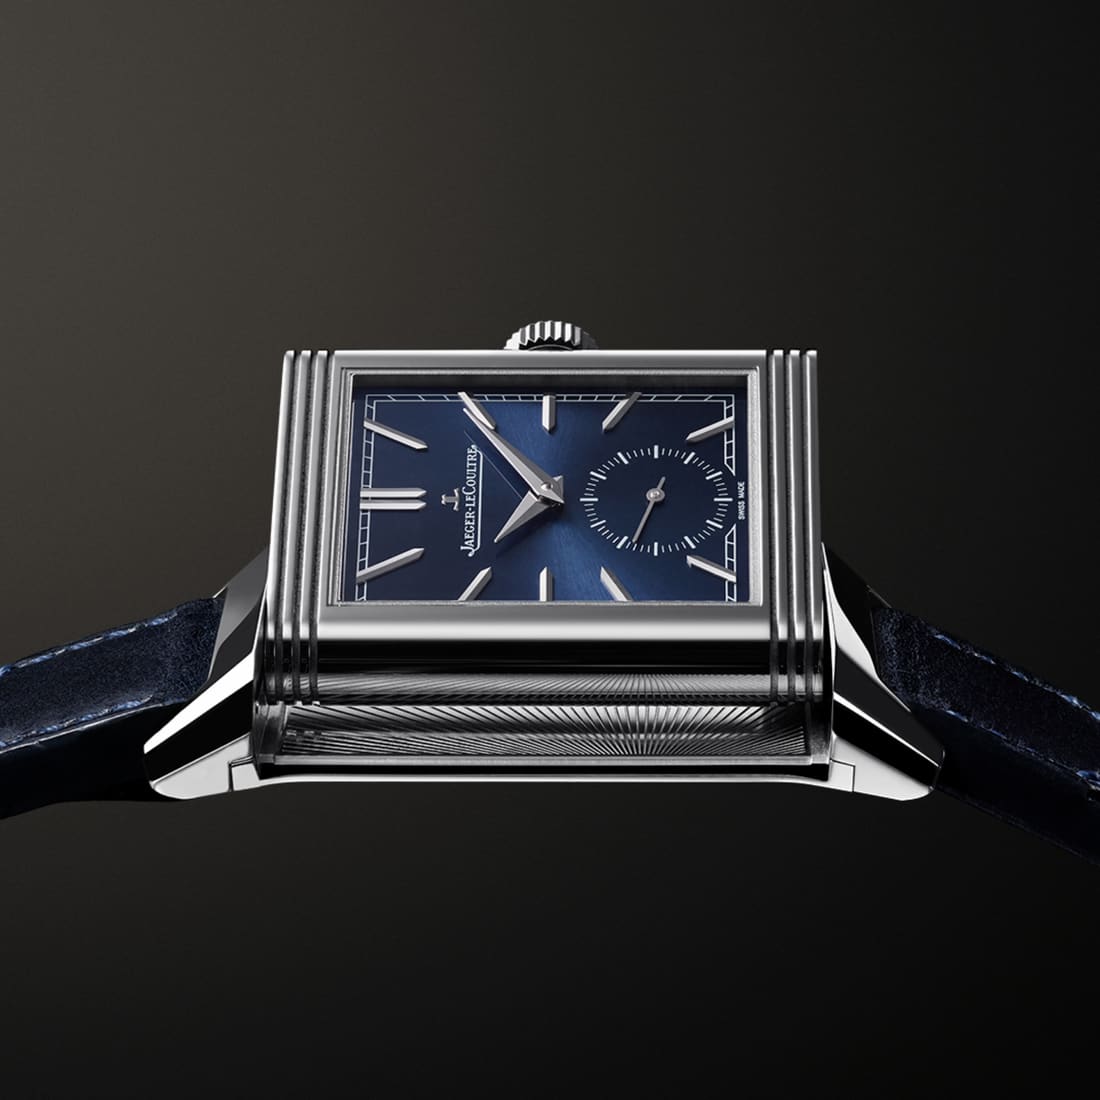 The history of the Reverso collection | Jaeger-LeCoultre